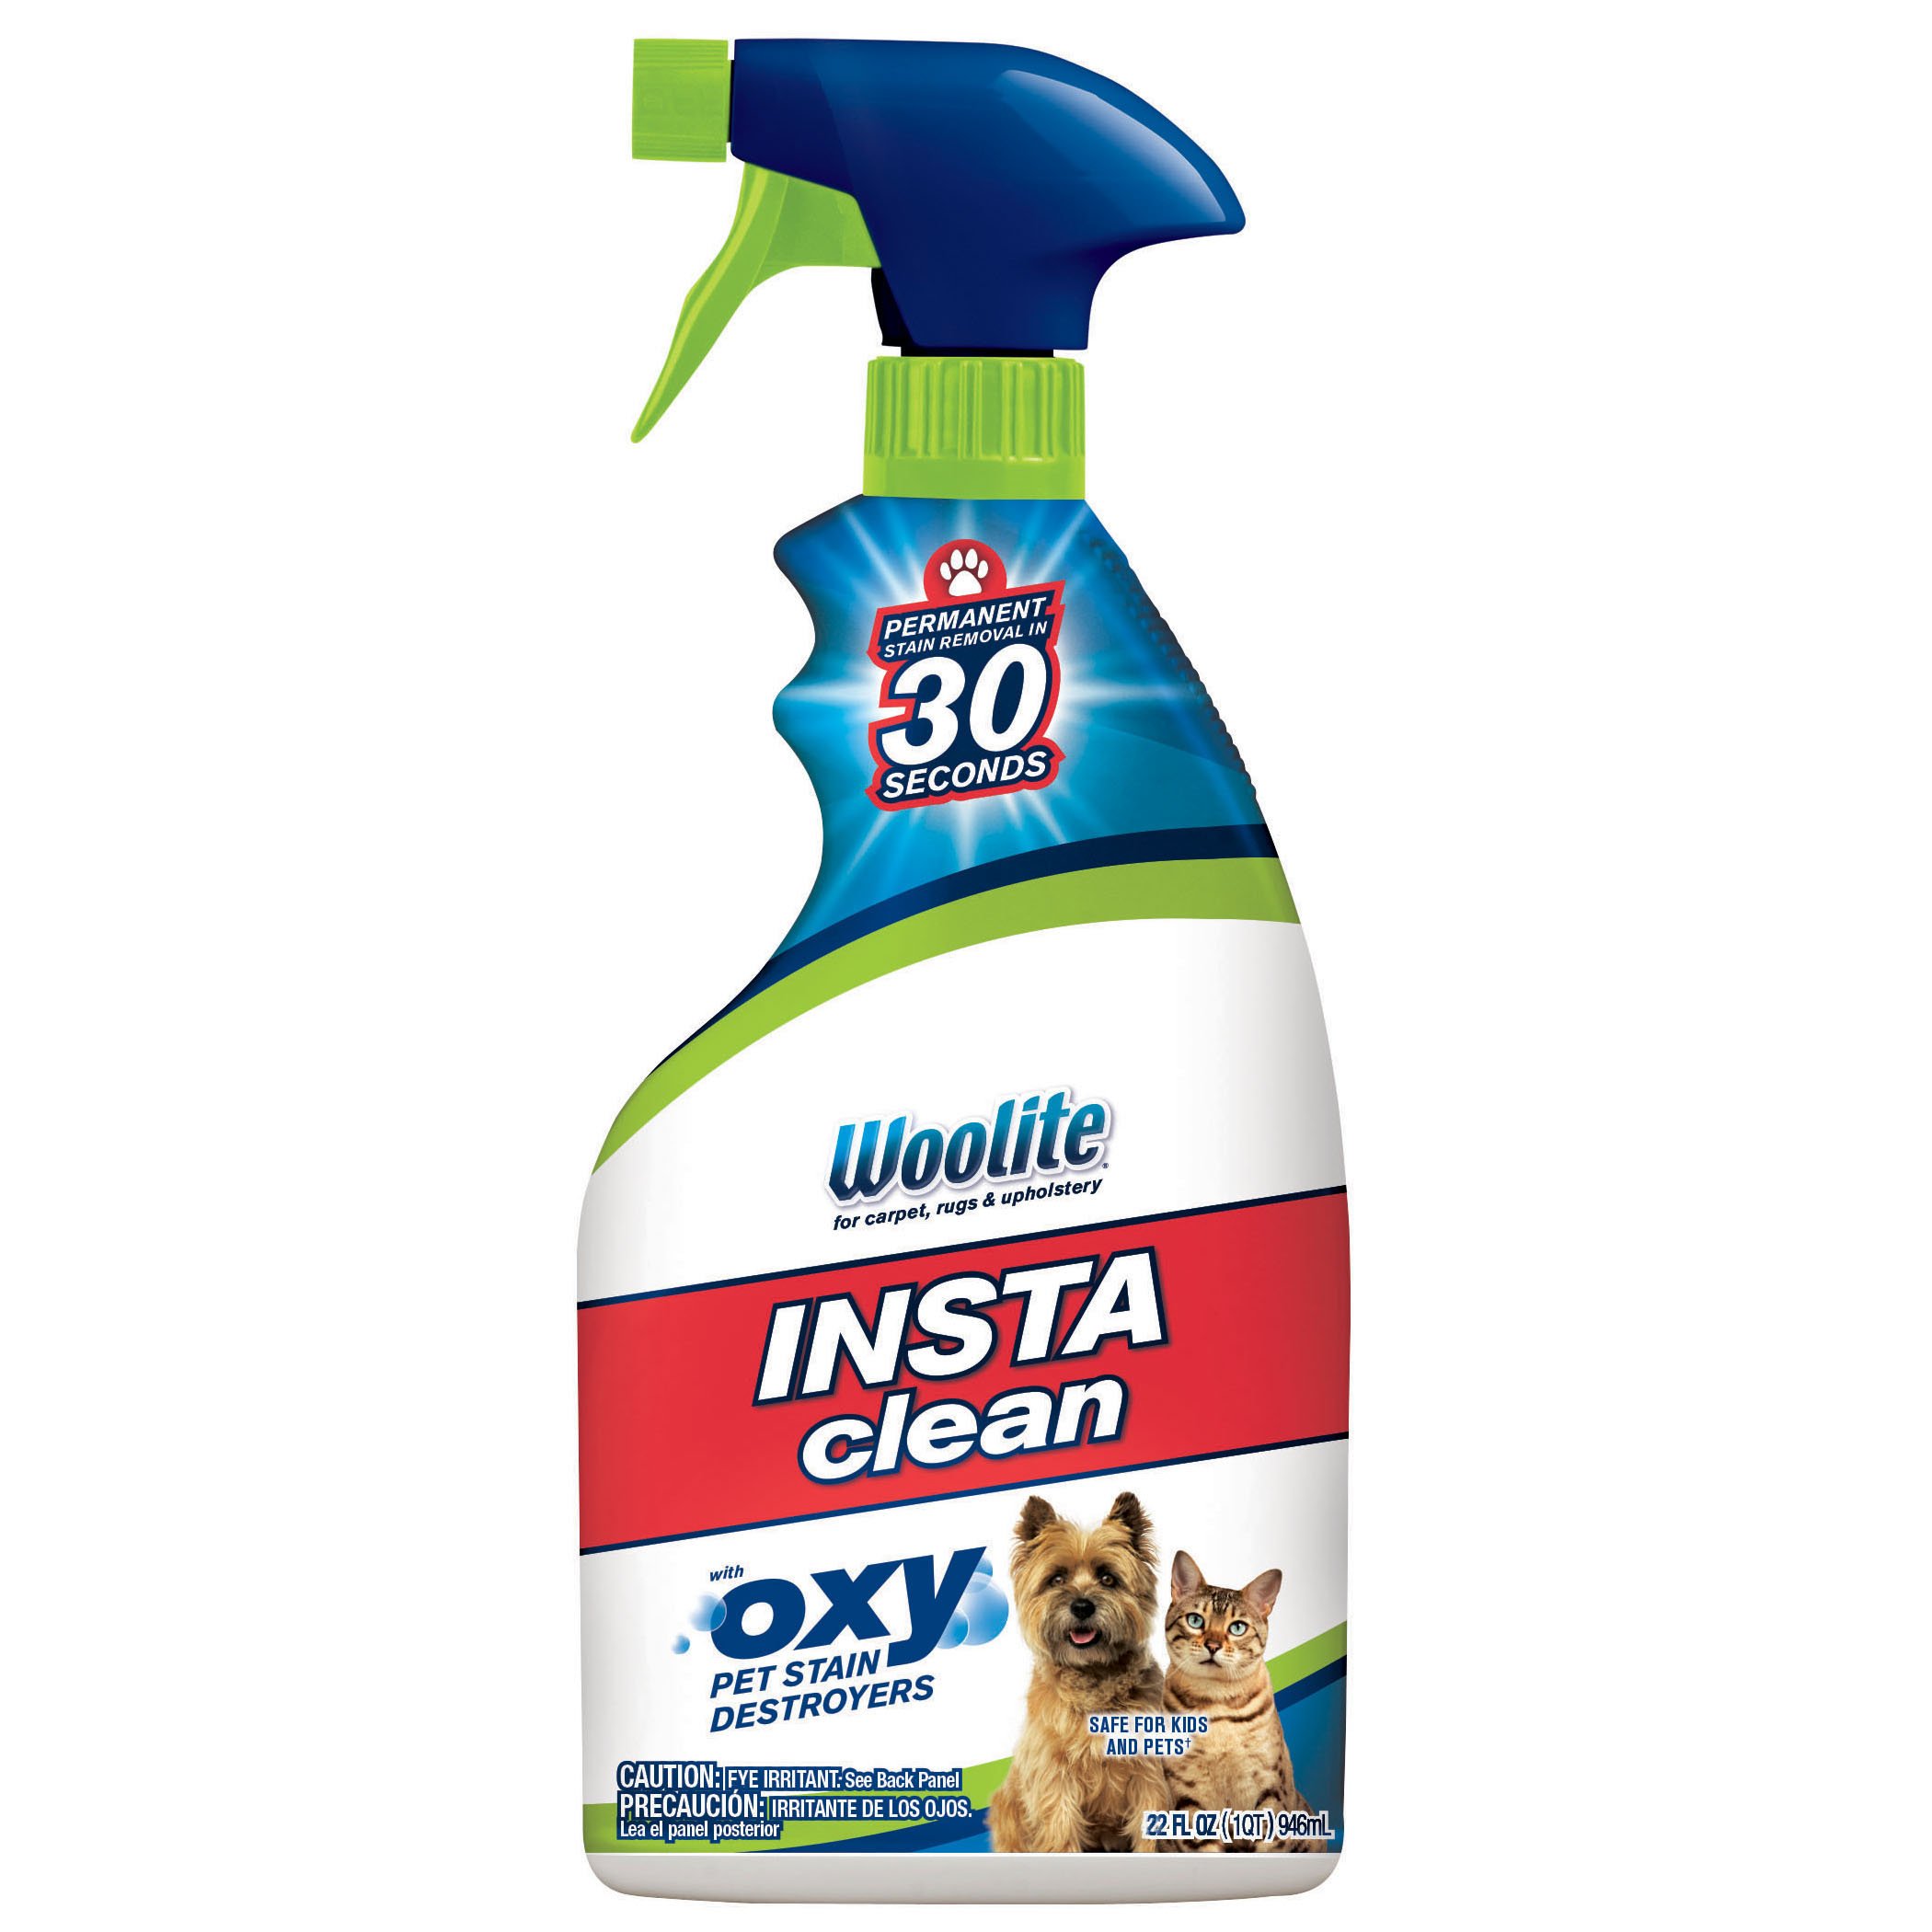 Woolite Instaclean Oxy Pet Stain Remover with Brush - Shop Carpet &  Upholstery Cleaners at H-E-B